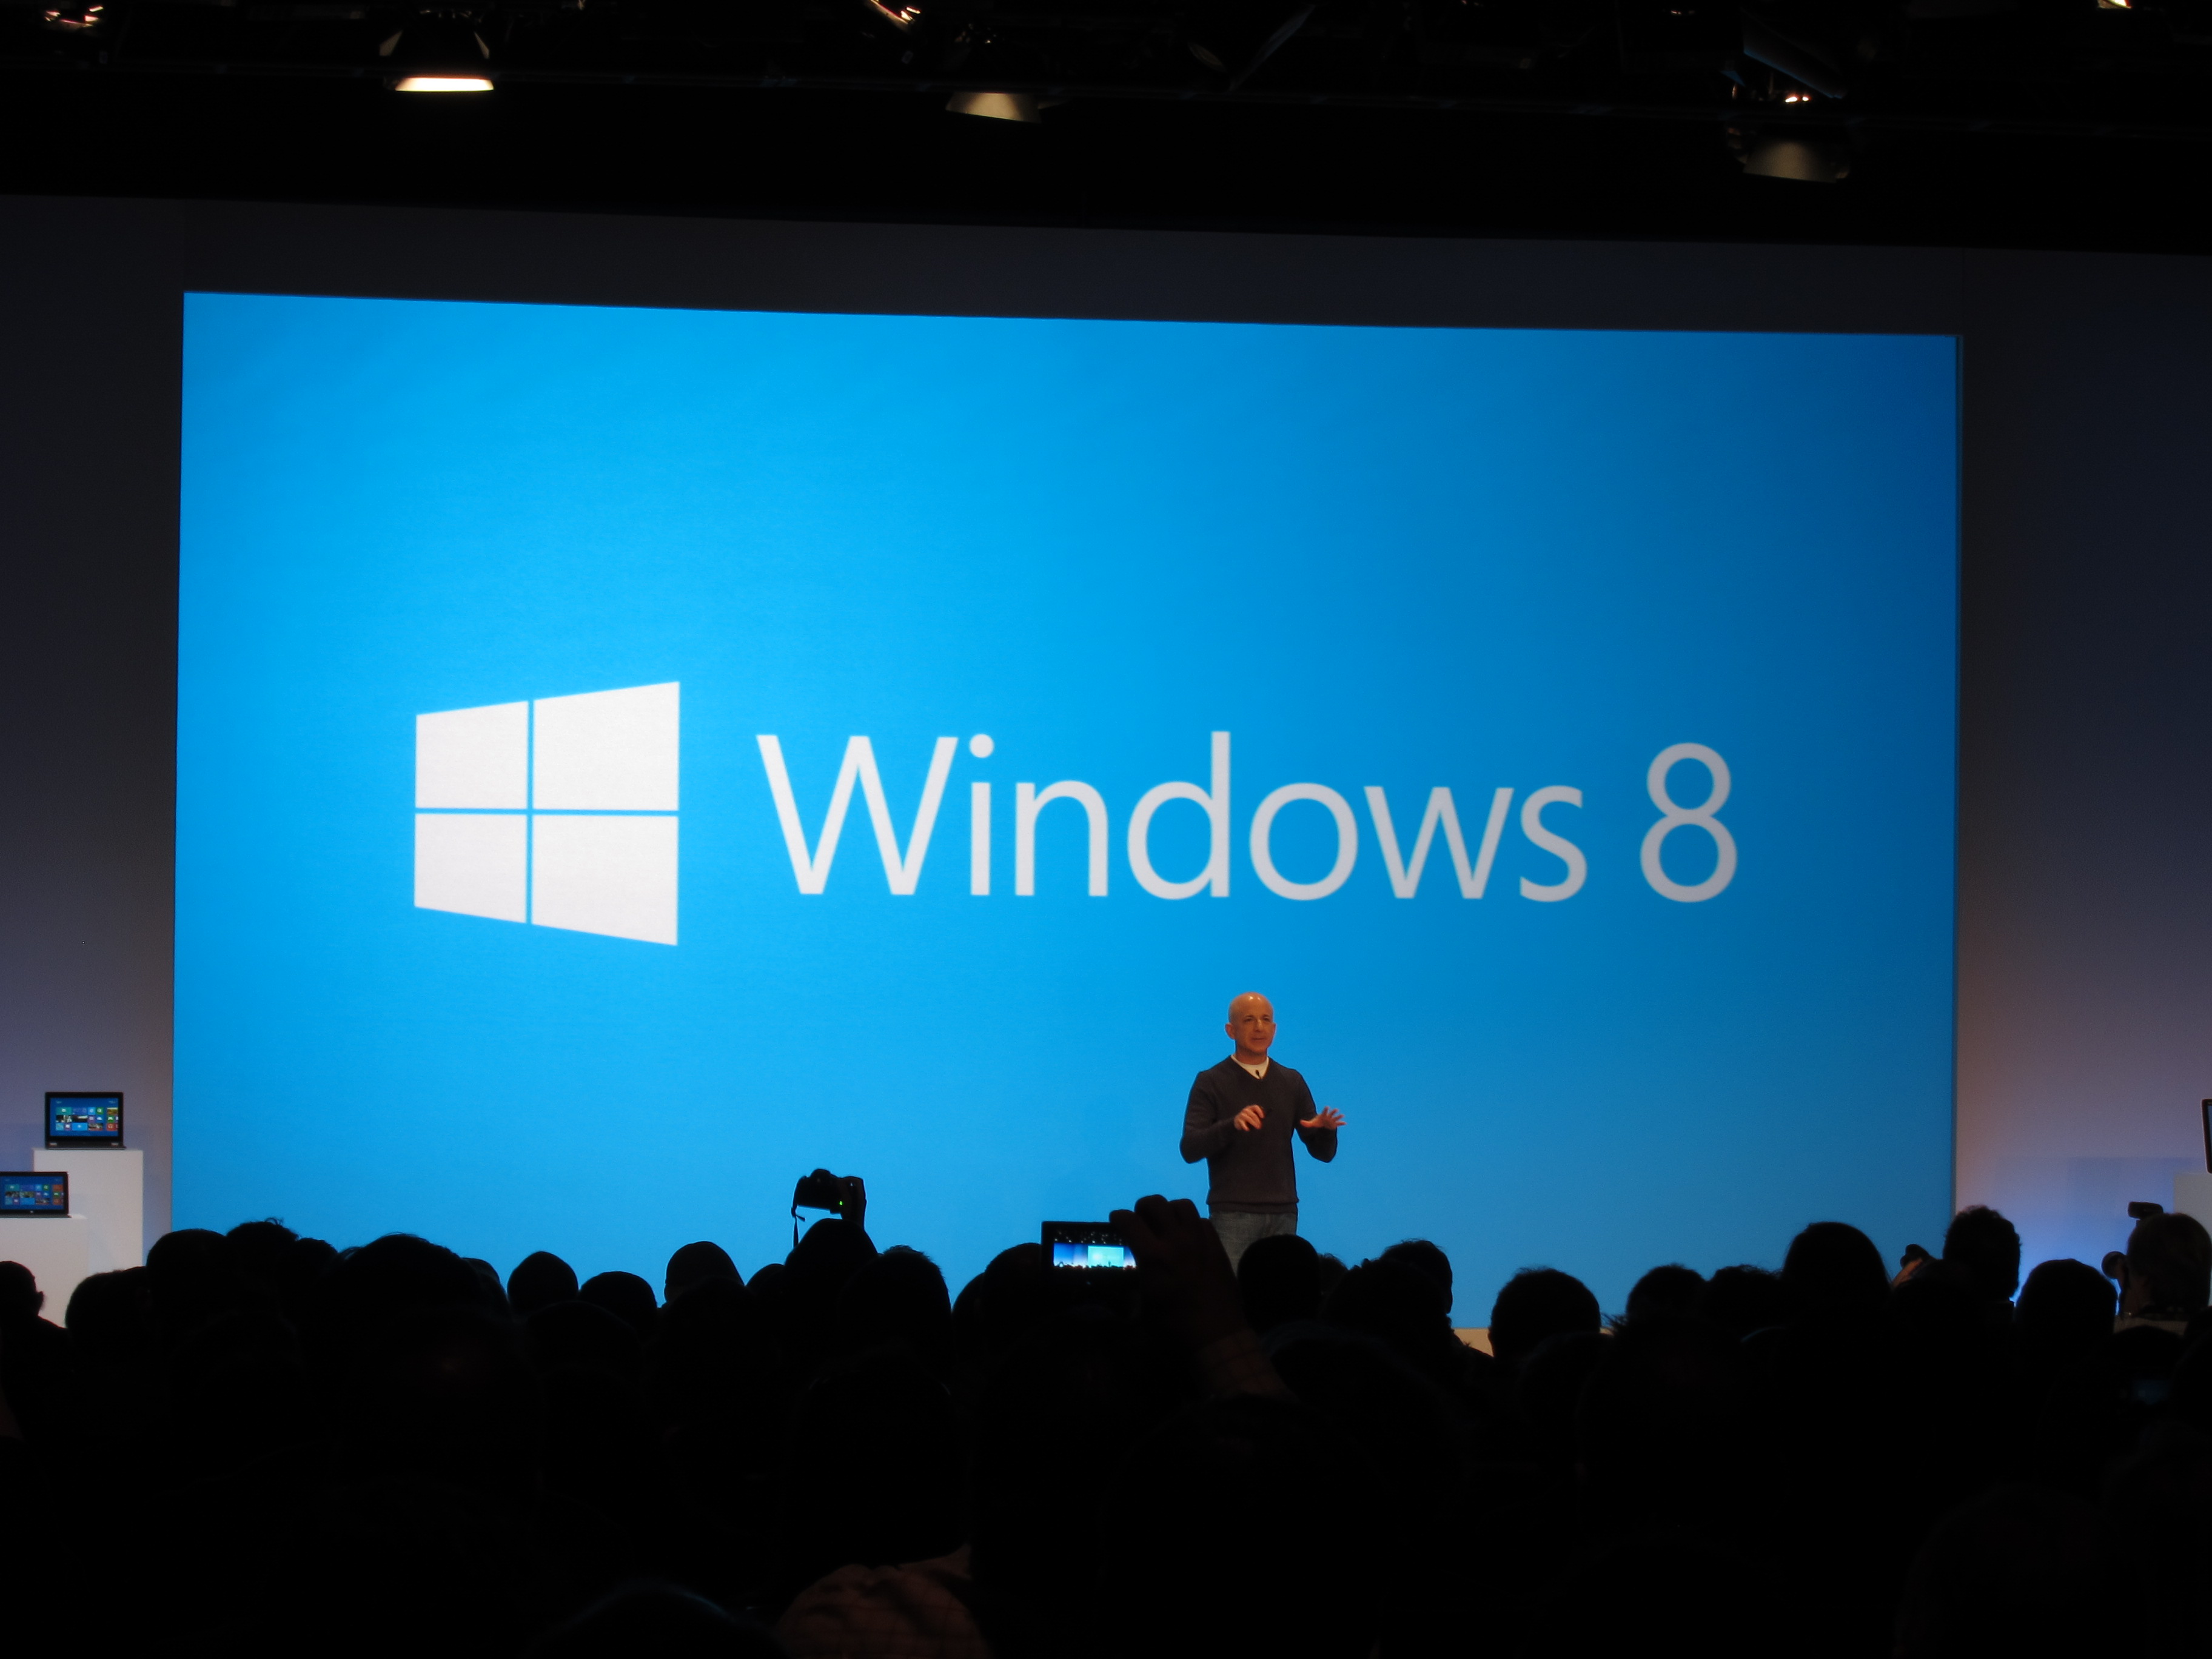 Windows chief Steven Sinofsky pushed out of Microsoft